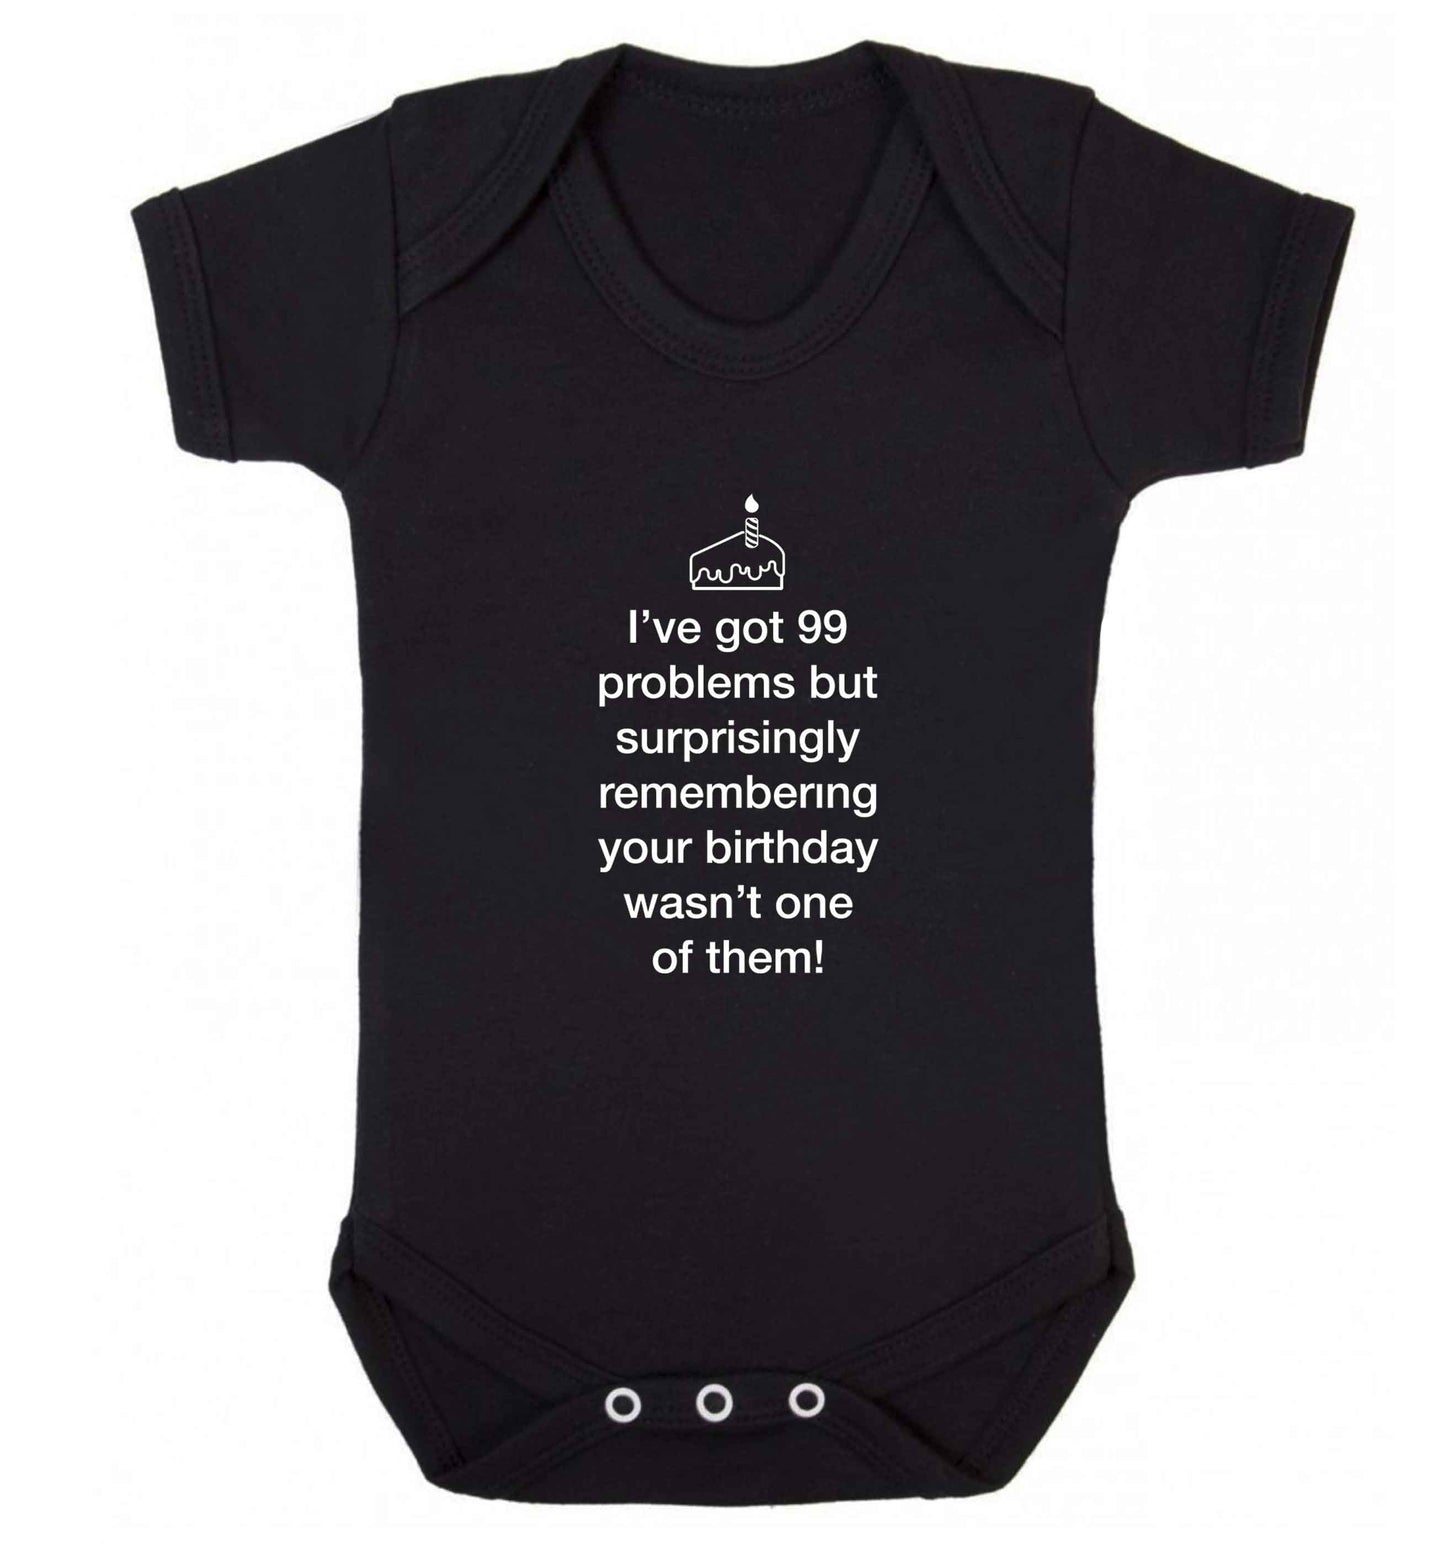 I've got 99 problems but surprisingly remembering your birthday wasn't one of them! baby vest black 18-24 months